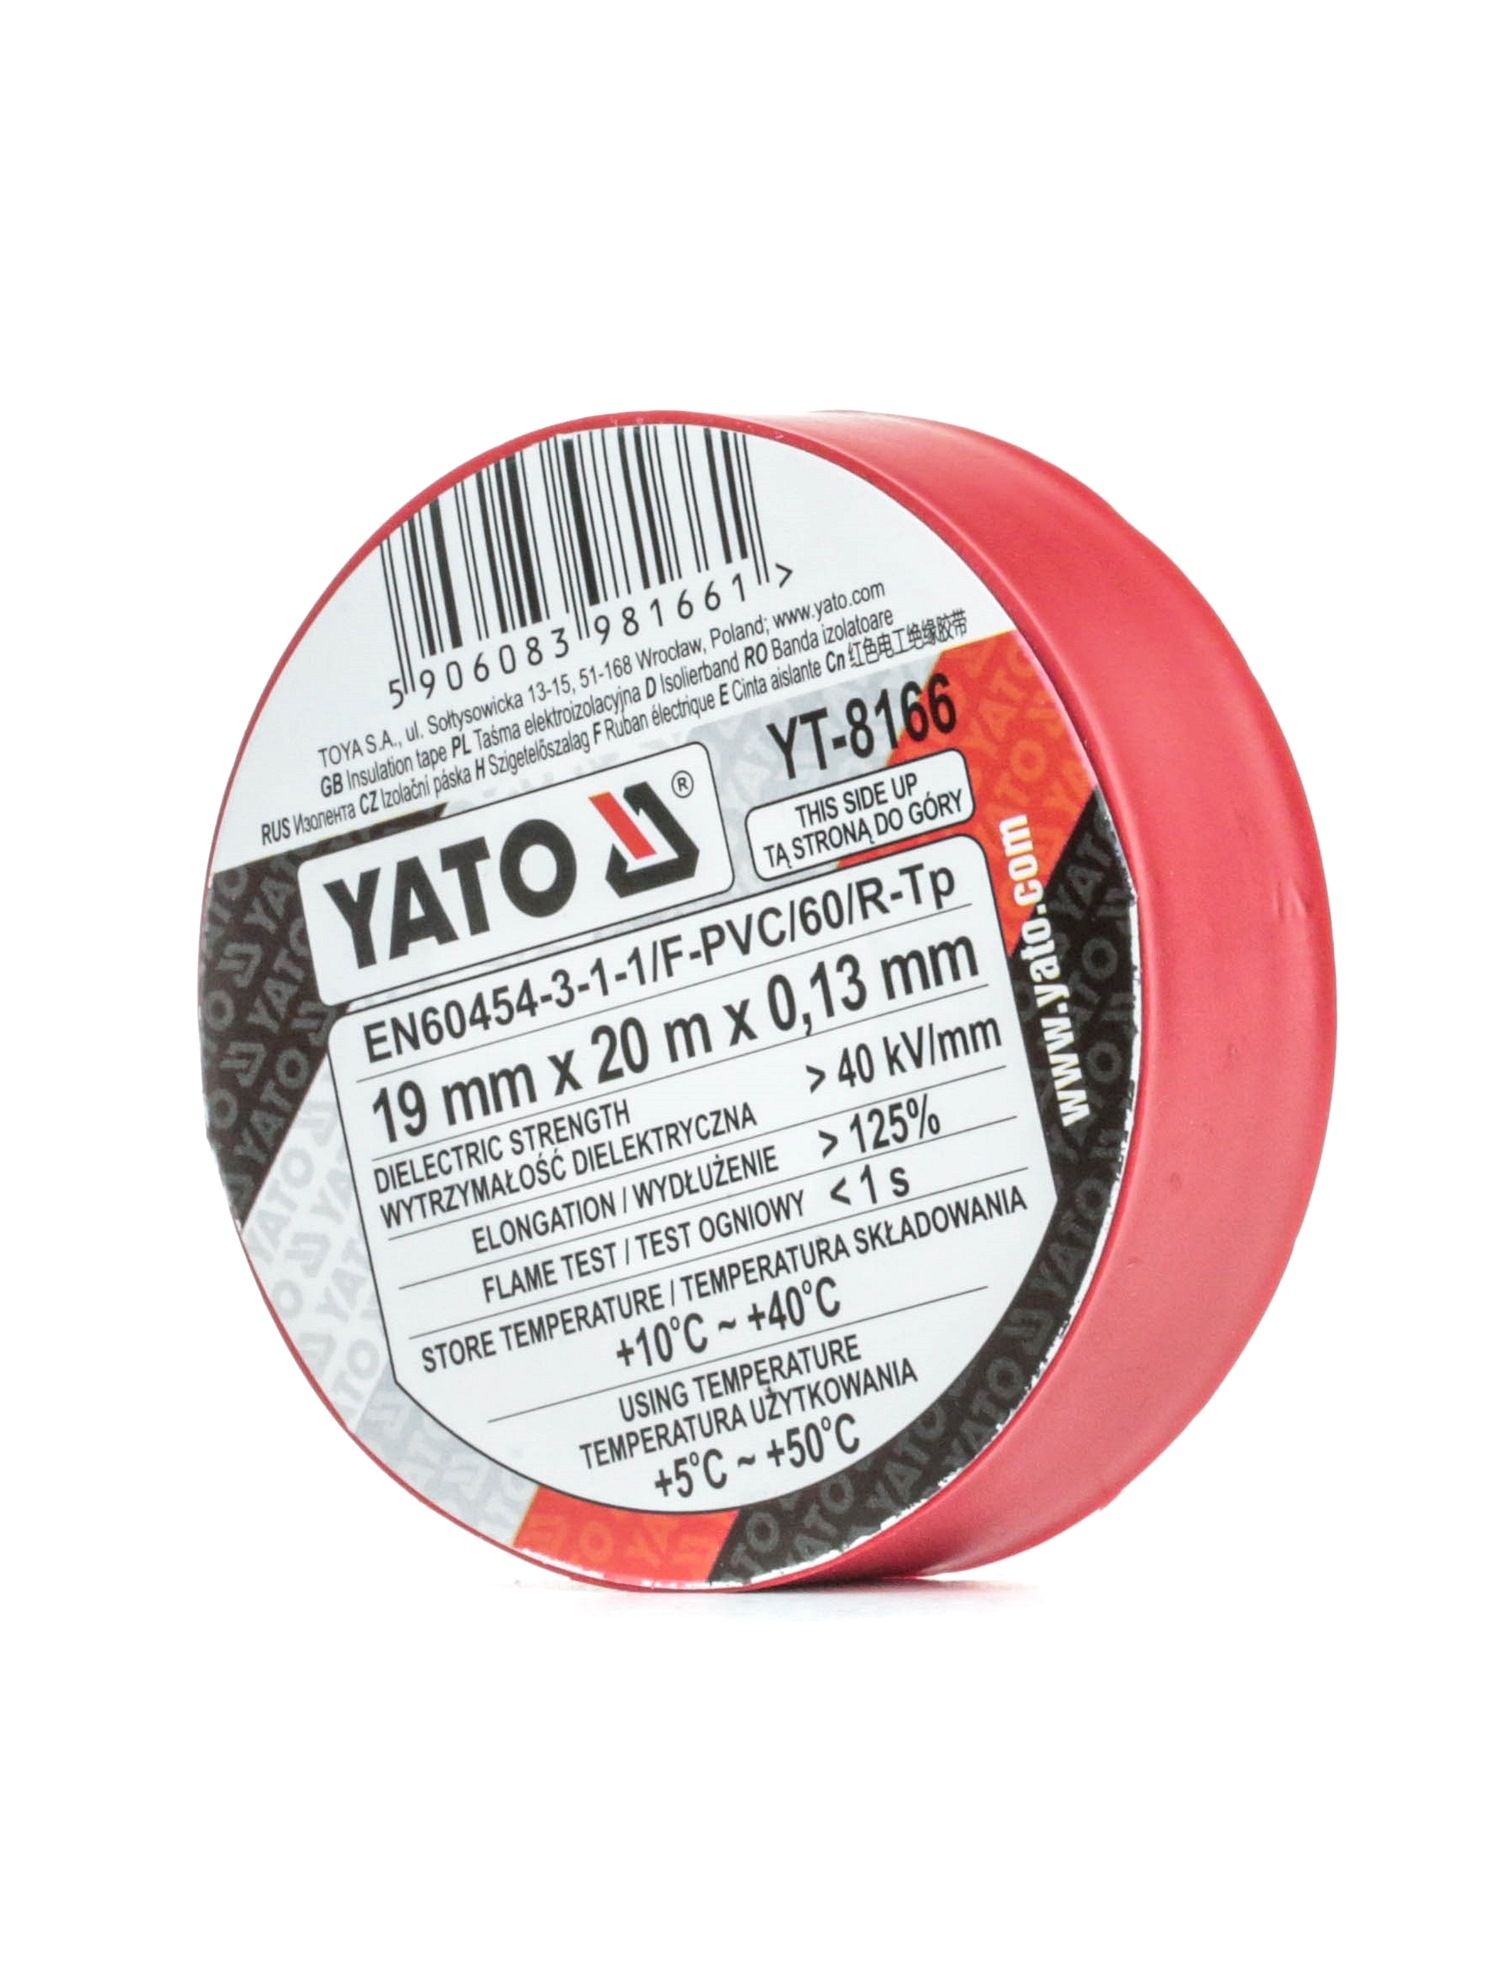 YATO YT-8166 Adhesive Tape 19mm, red, PVC, Fabric film, 20m, One-sided